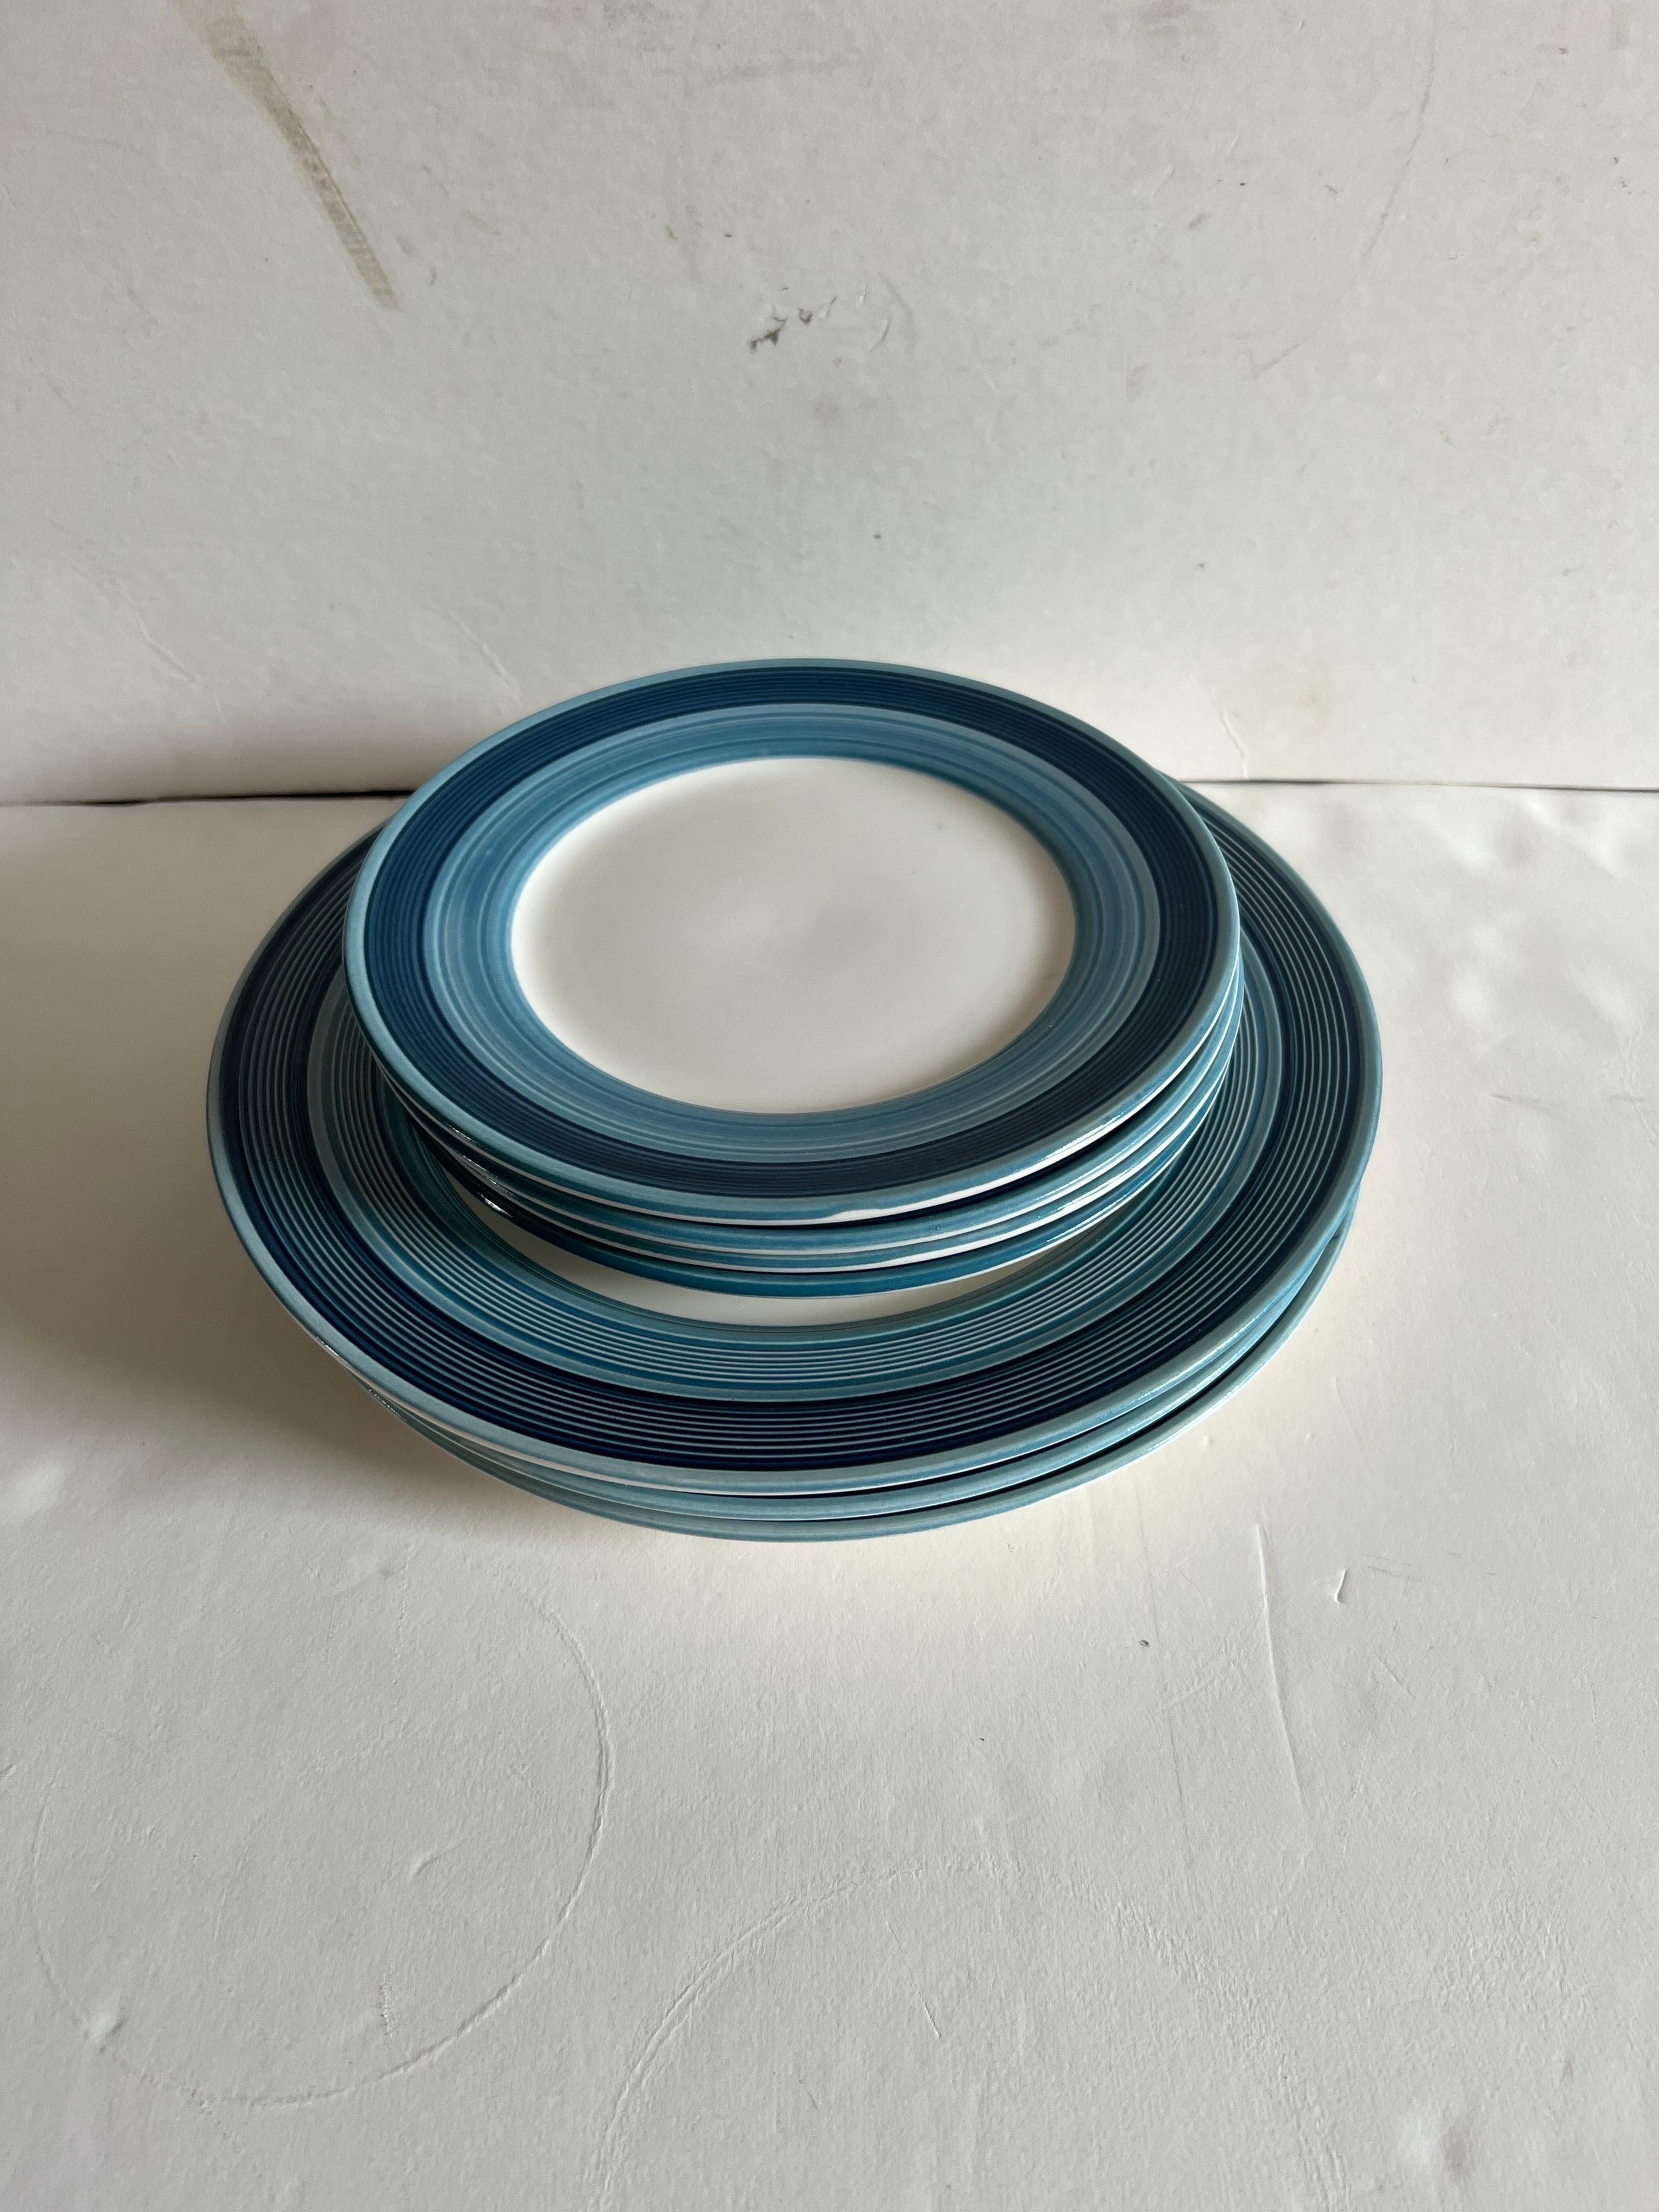 A set of 8 dinner and salad plates by Imperial Stone in the Indigo pattern.

Made in Japan, circa 1960-1970.

Includes the following 8 pieces:

8 Salad plates, 7.75” W

8 Dinner plates, 10.5” W

Condition: Very good/pre-owned. Minimal